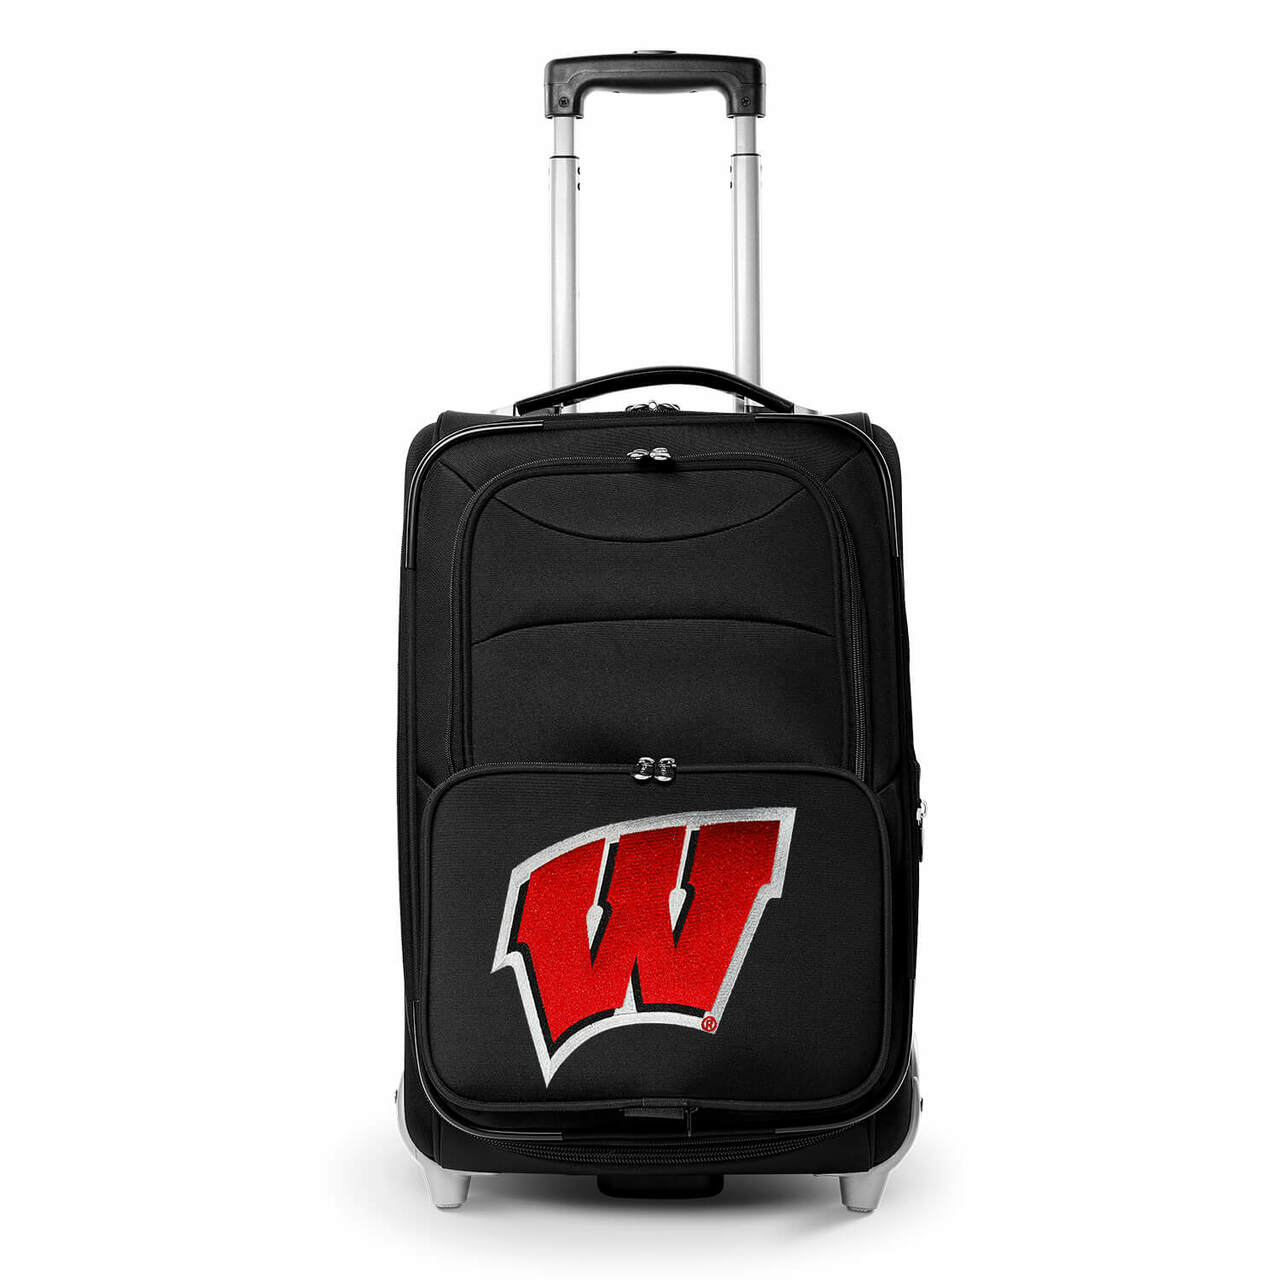 Badgers Carry On Luggage | Wisconsin Badgers Rolling Carry On Luggage